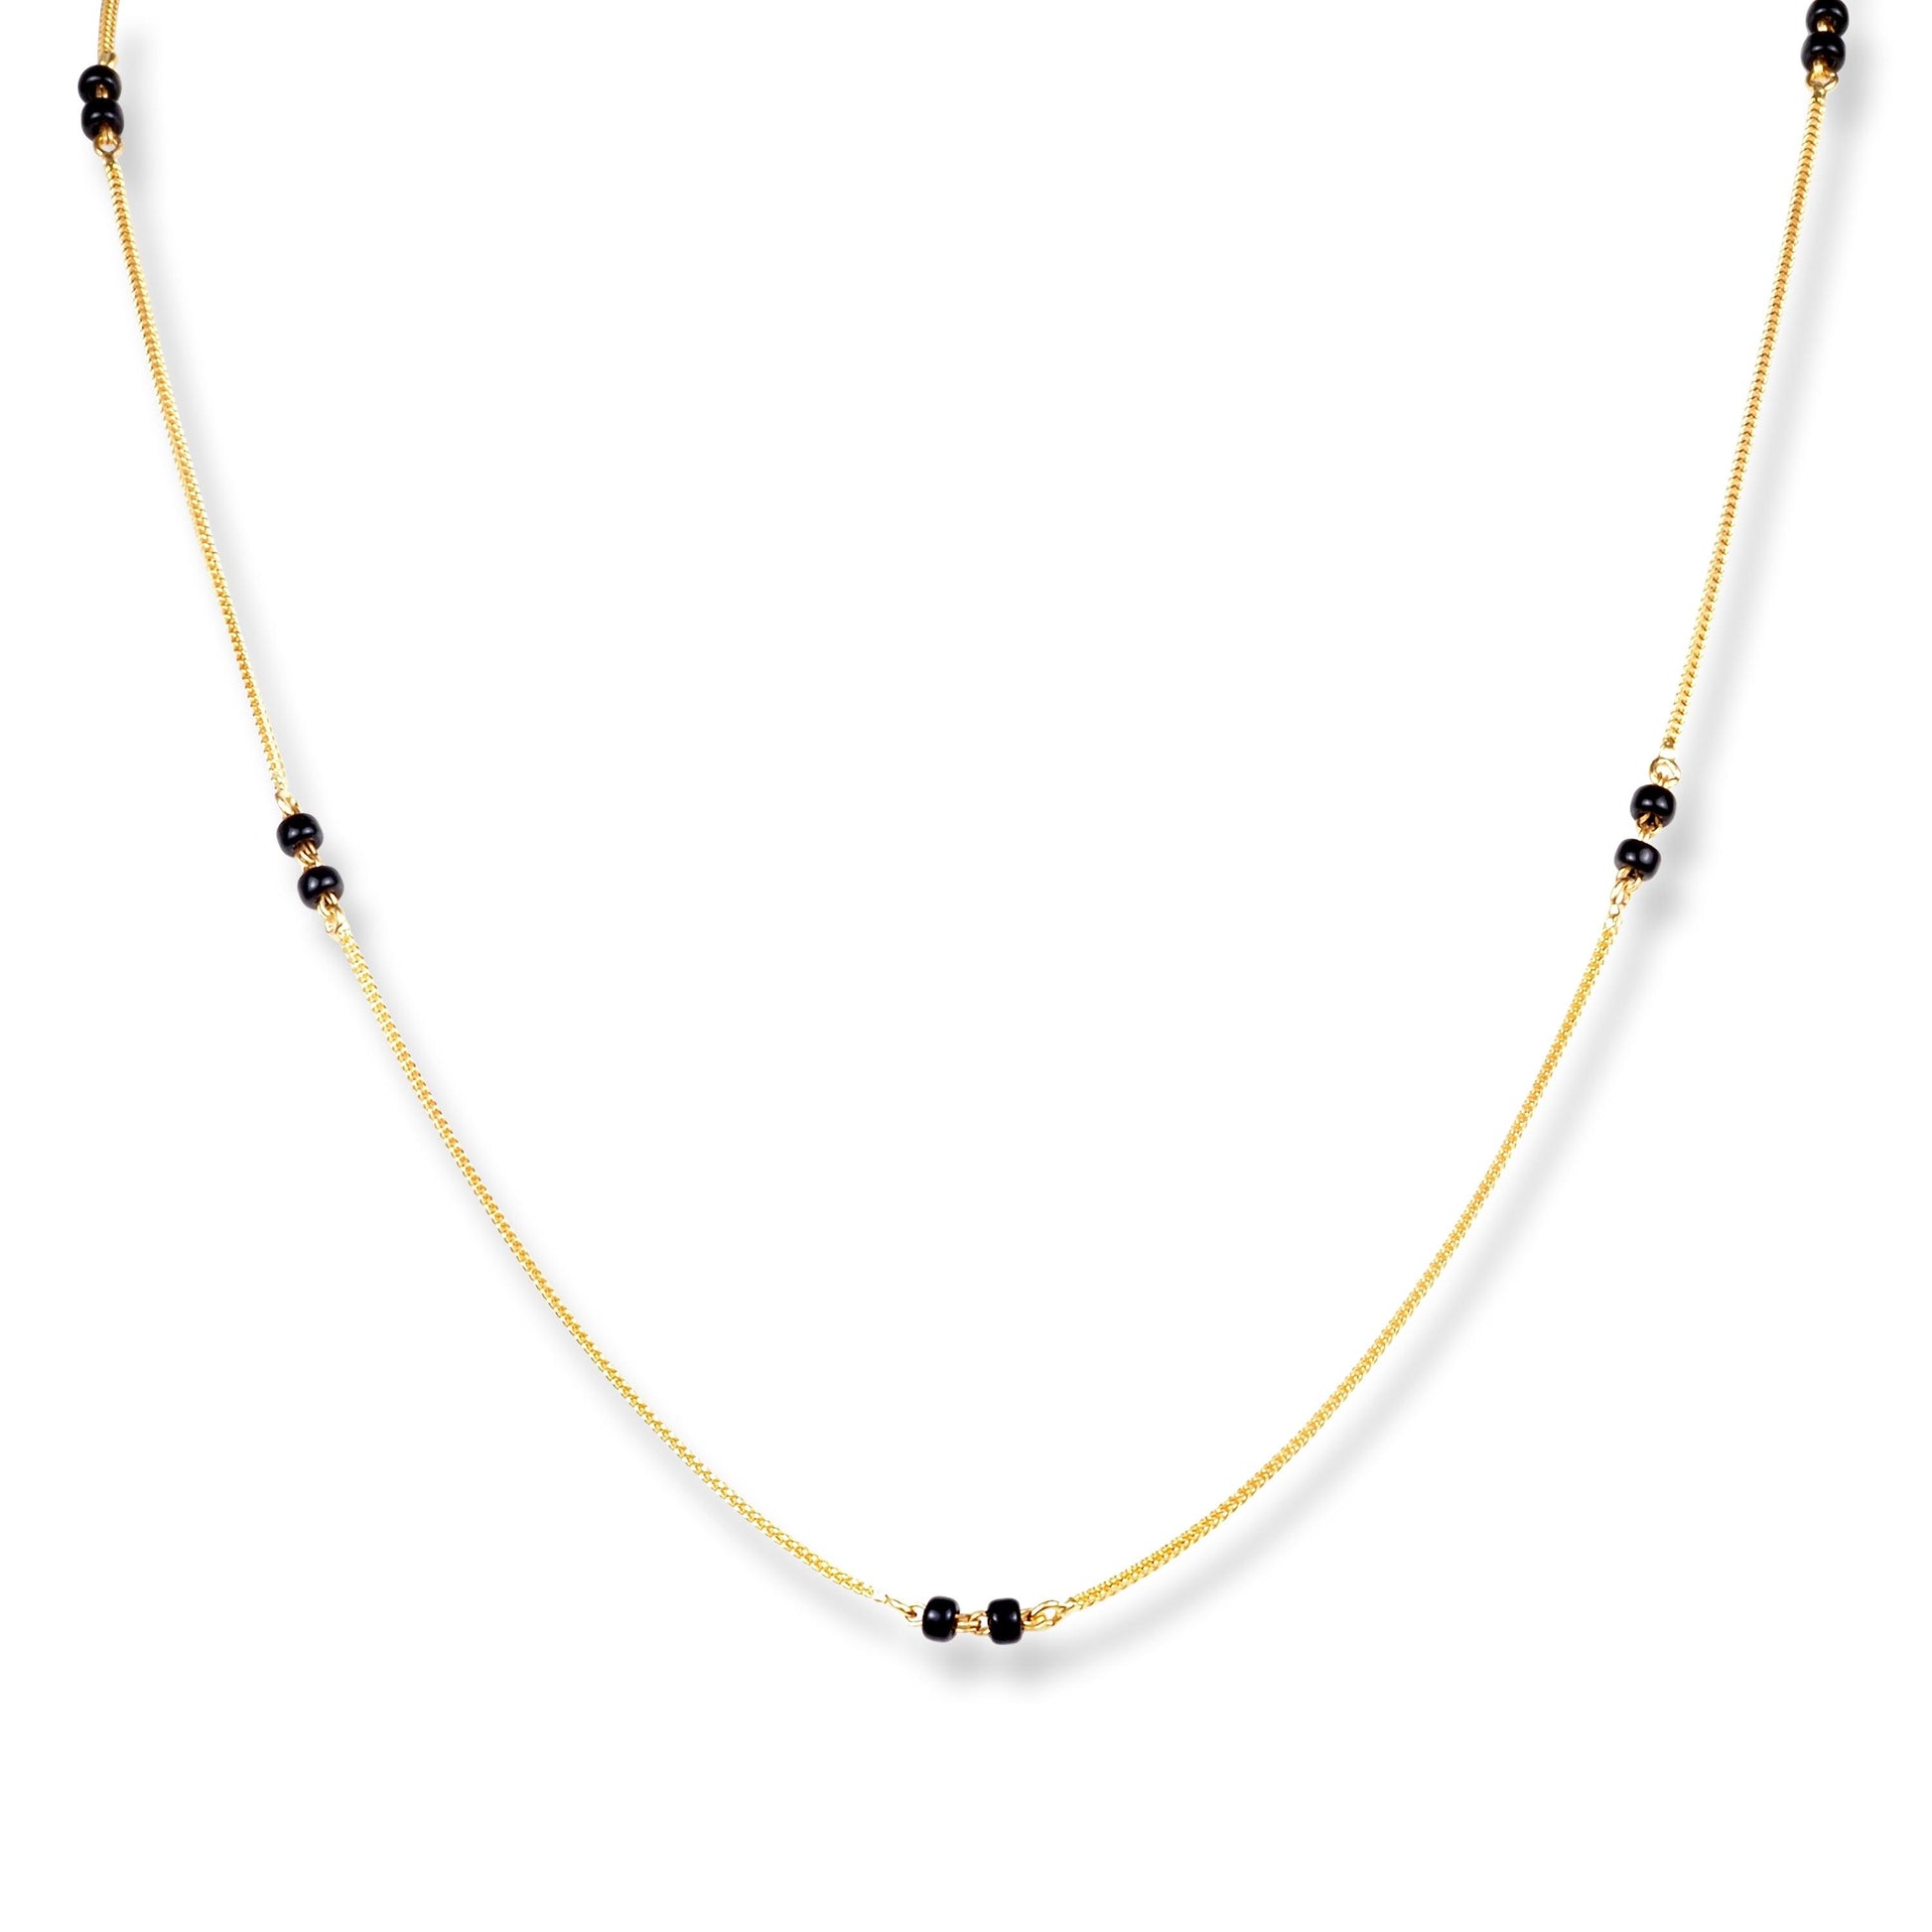 22ct Gold Foxtail Chain with Two Black Beads at Intervals with Lobster Clasp C-7145 - Minar Jewellers